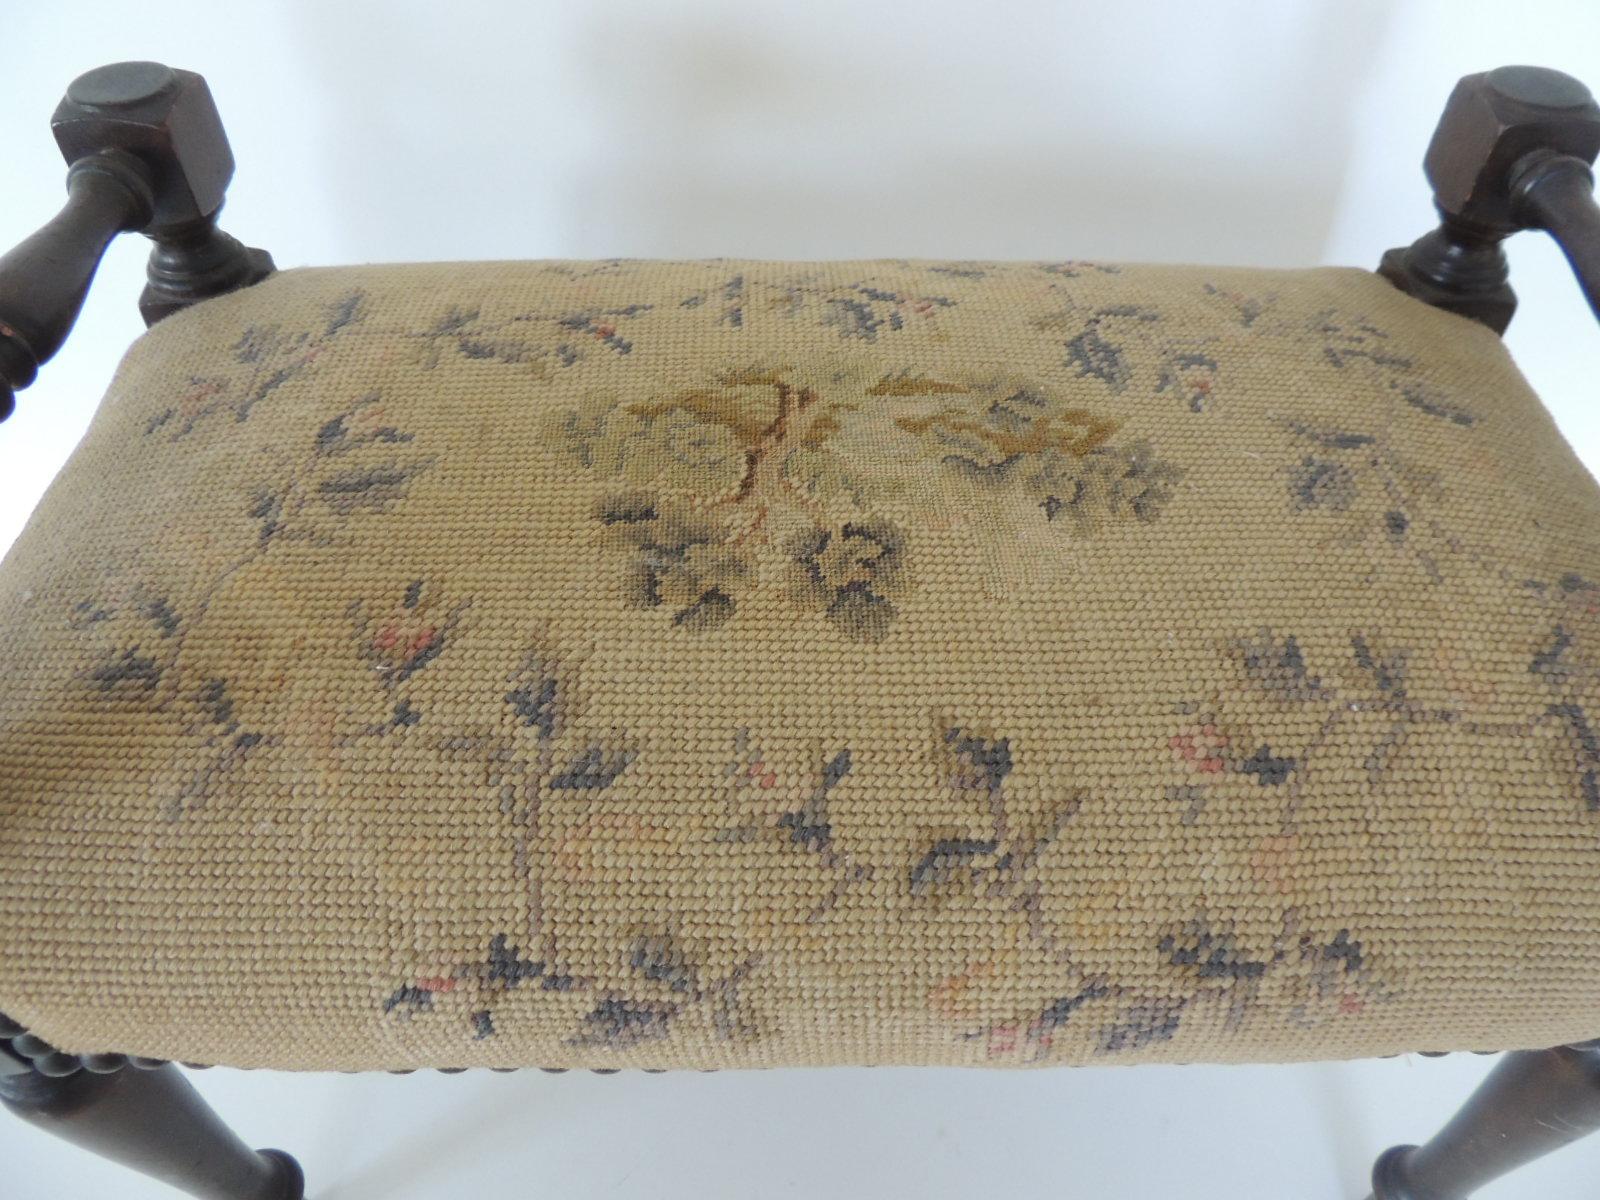 Antique needlepoint floral tapestry footstool.
Yellow and green tapestry stool, wood turned legs and antique nailheads
tacks all around. Very sturdy.
Size: 18